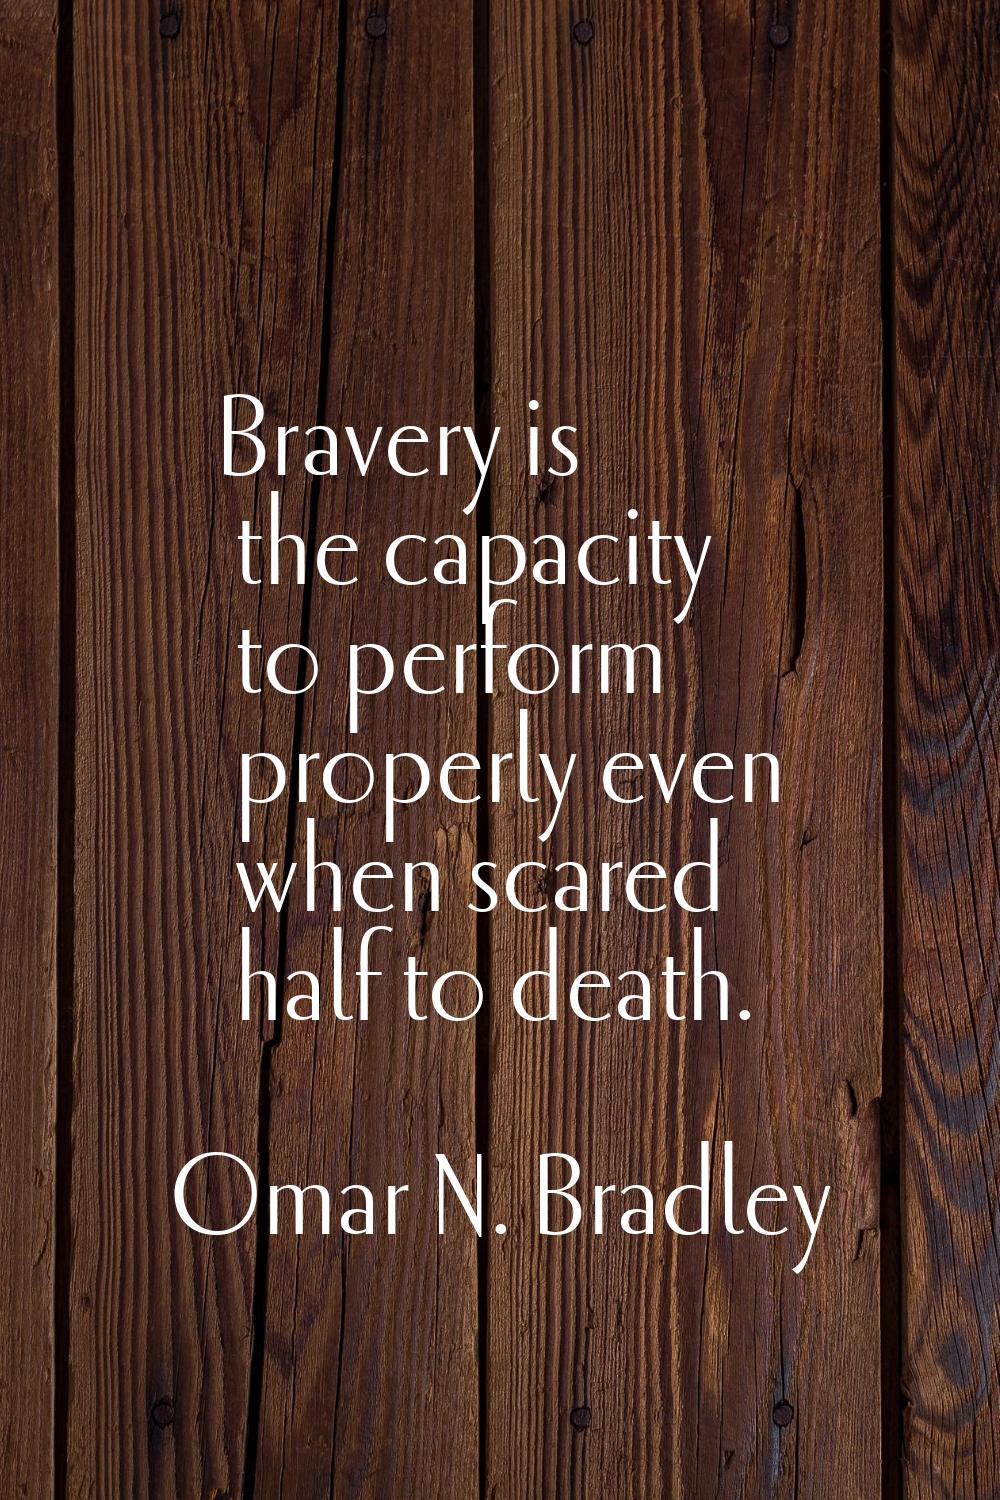 Bravery is the capacity to perform properly even when scared half to death.